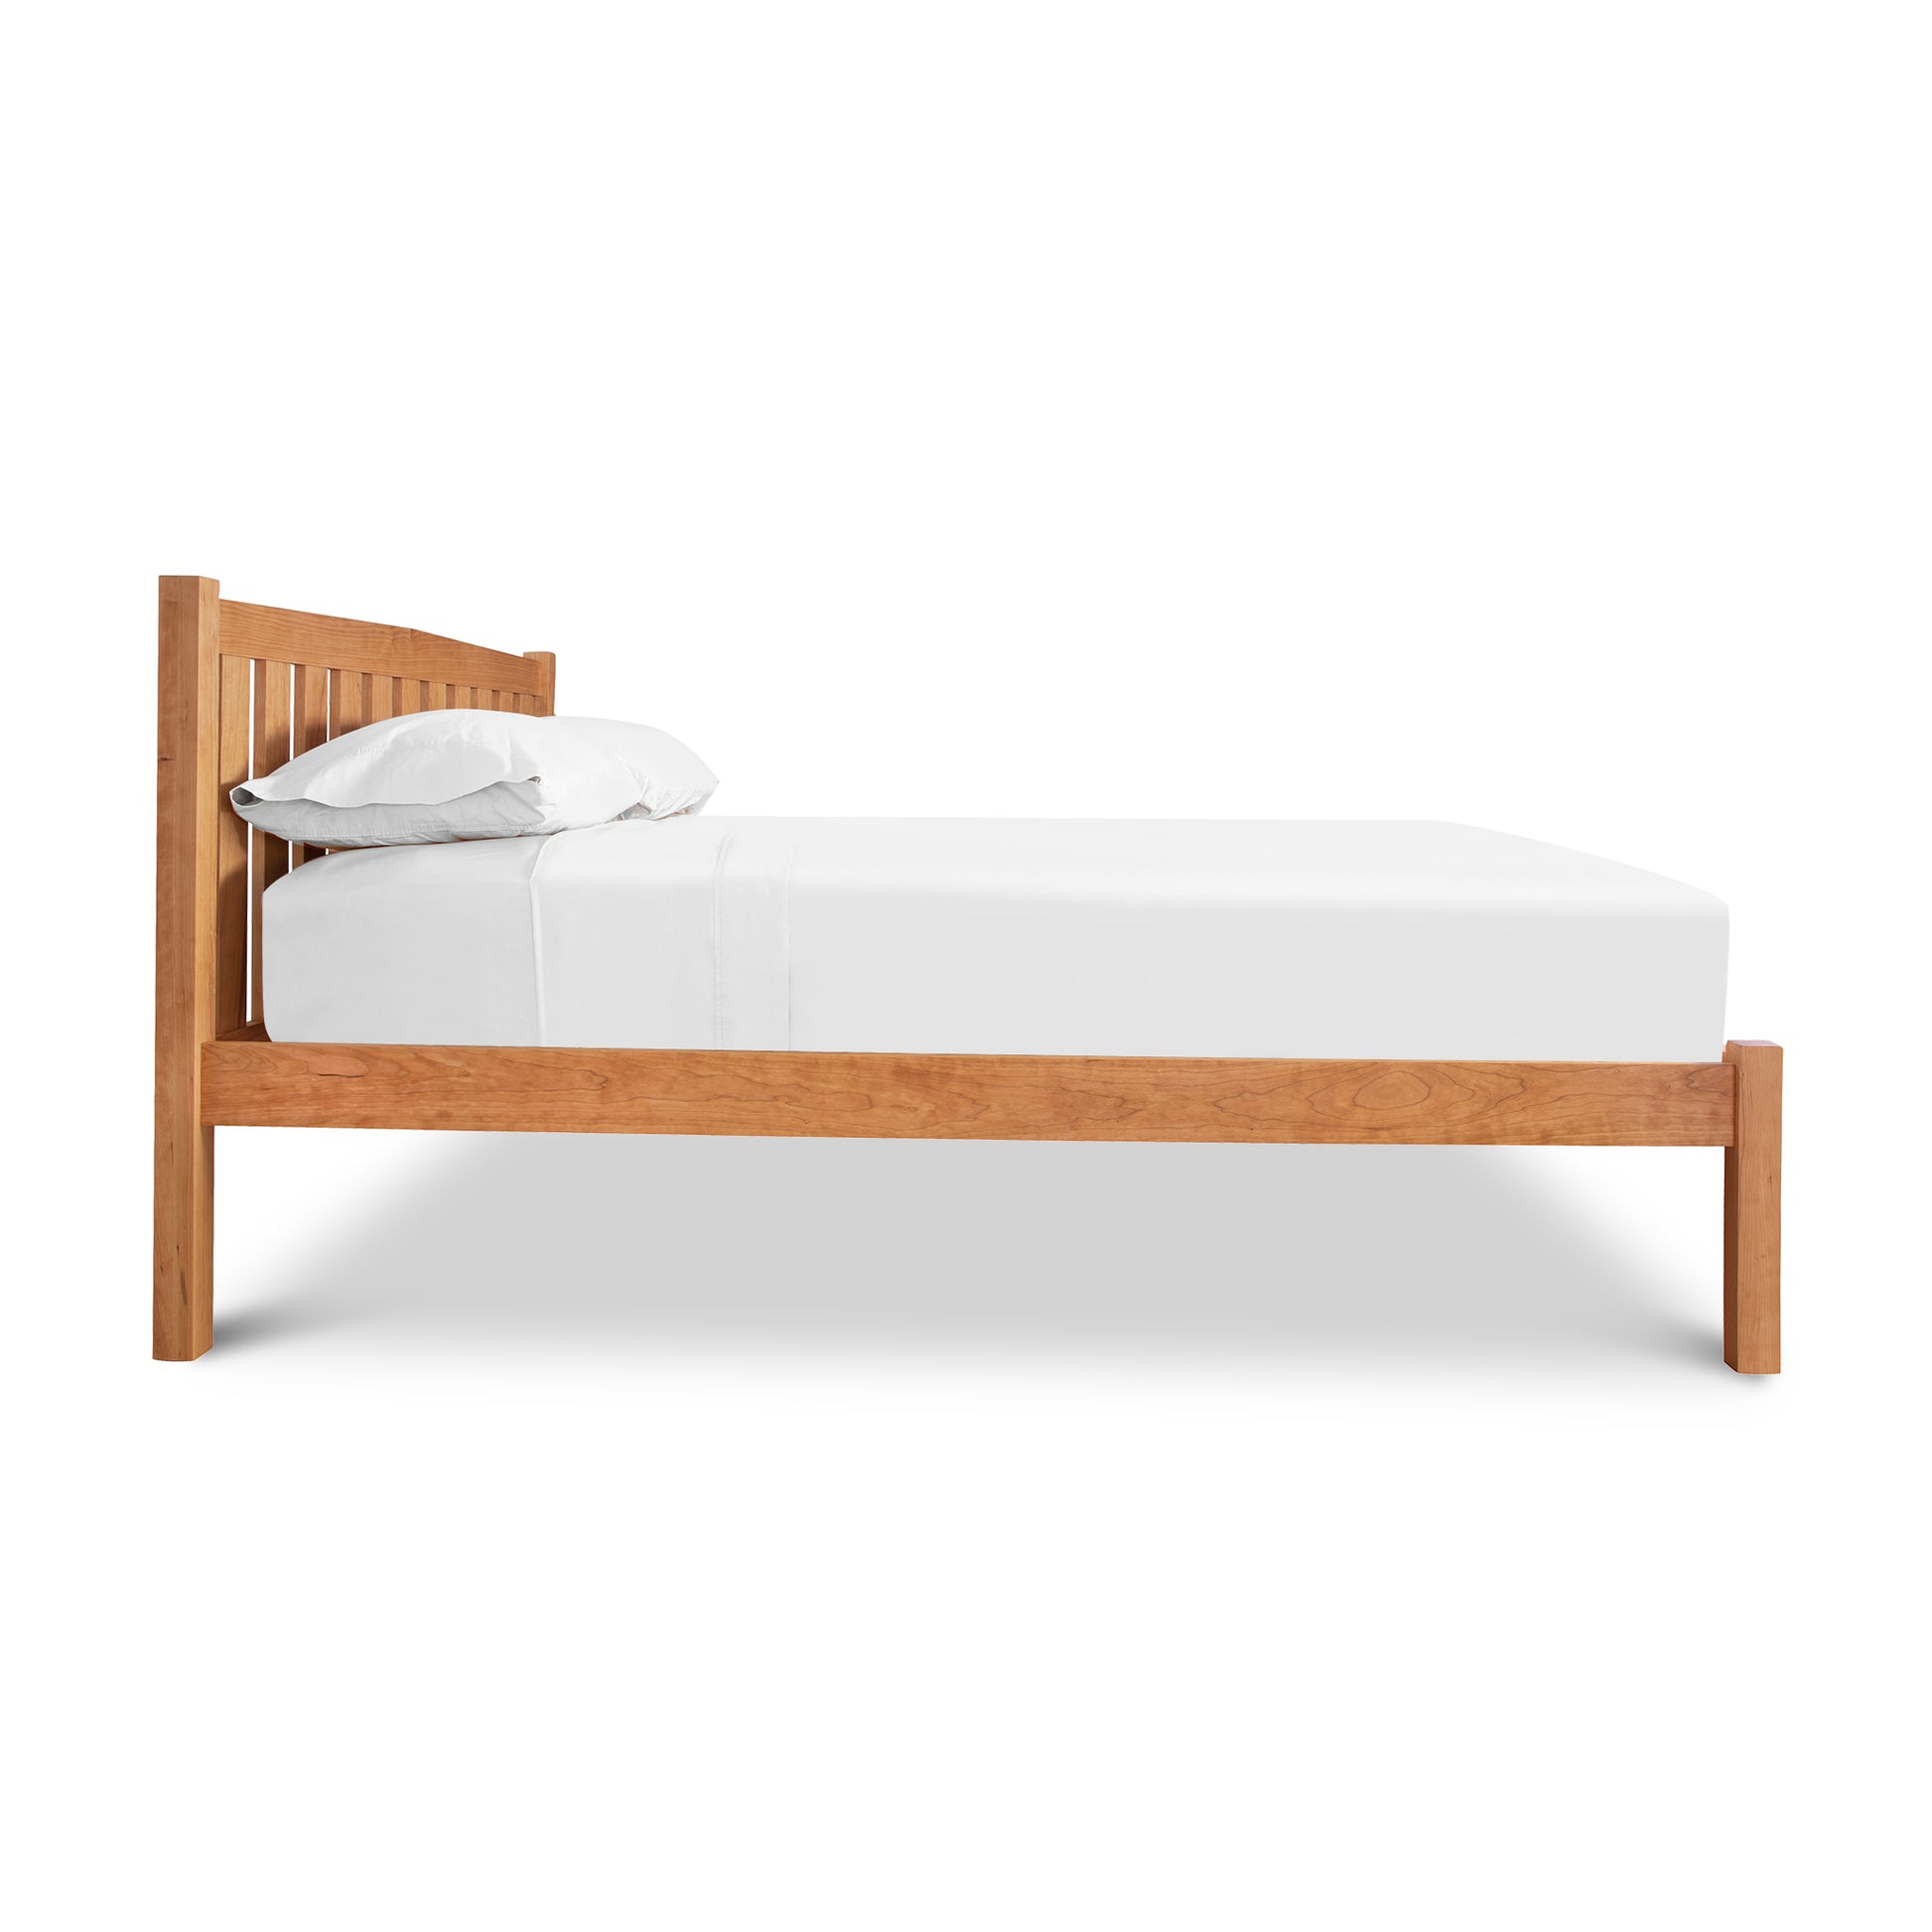 Bennington Bed with Low Footboard by Vermont Furniture Designs with white bedding isolated on a white background.